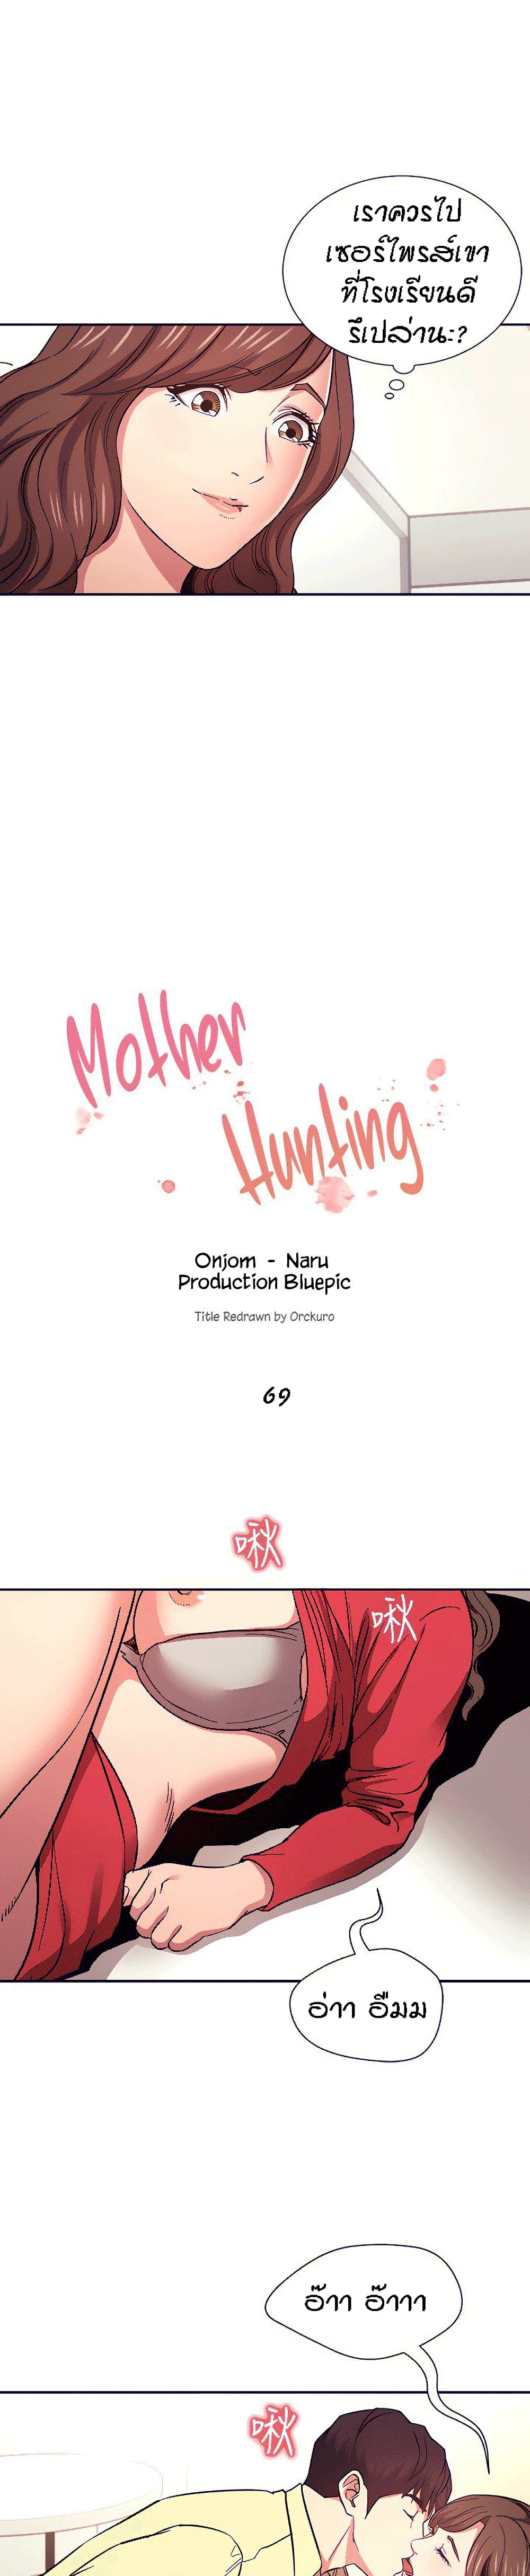 Mother Hunting 69 (2)